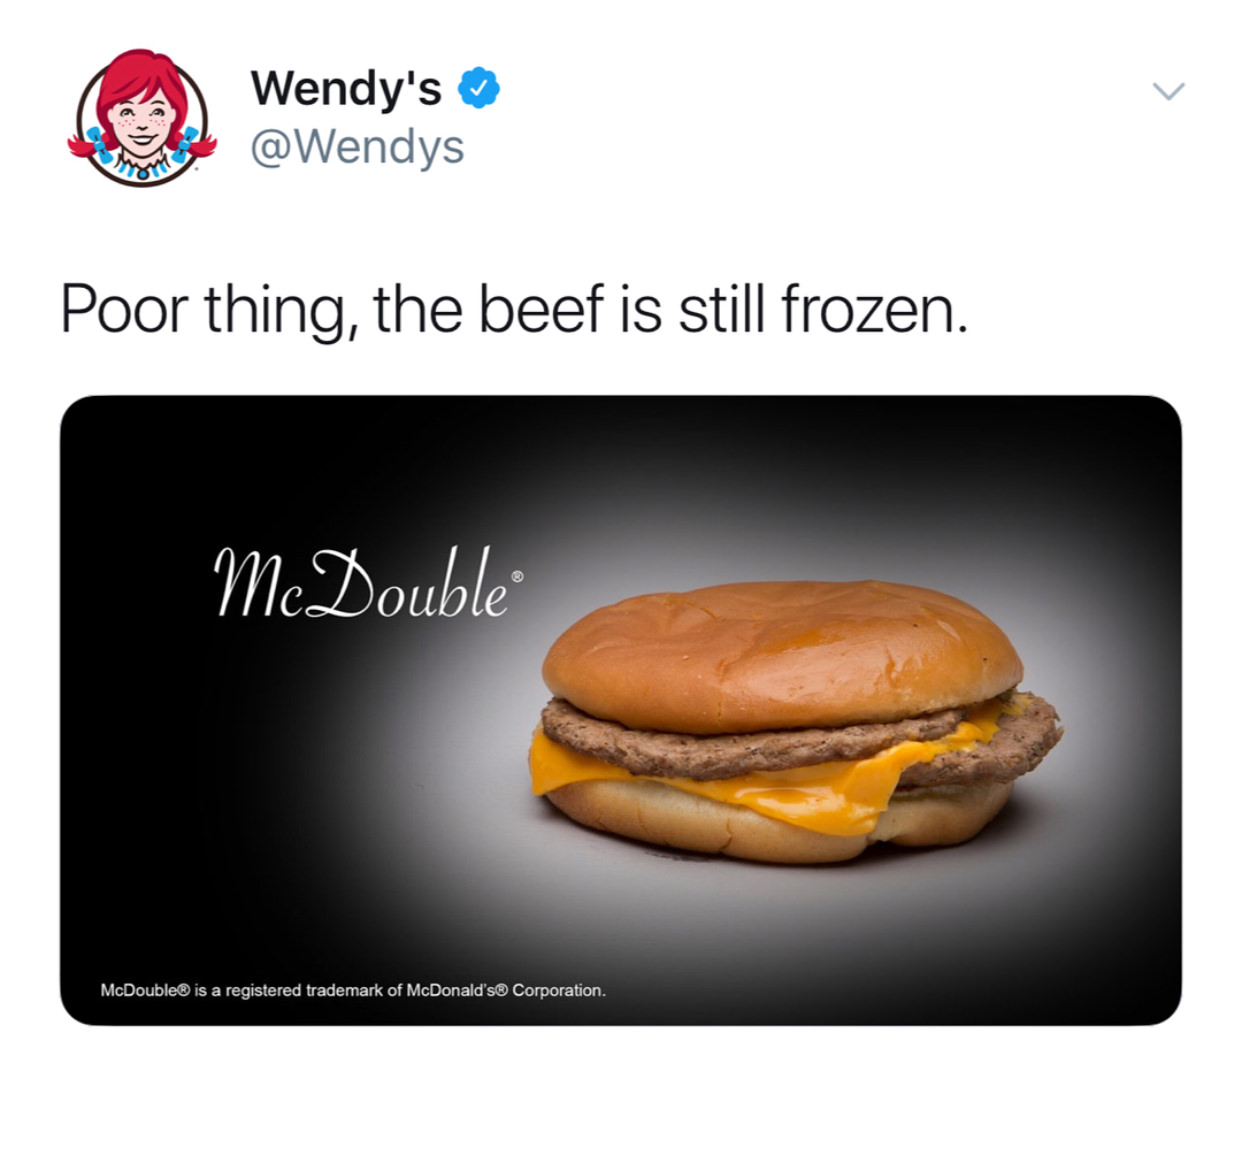 wendy's company - Wendy's Poor thing, the beef is still frozen. McDouble McDouble is a registered trademark of McDonald's Corporation.